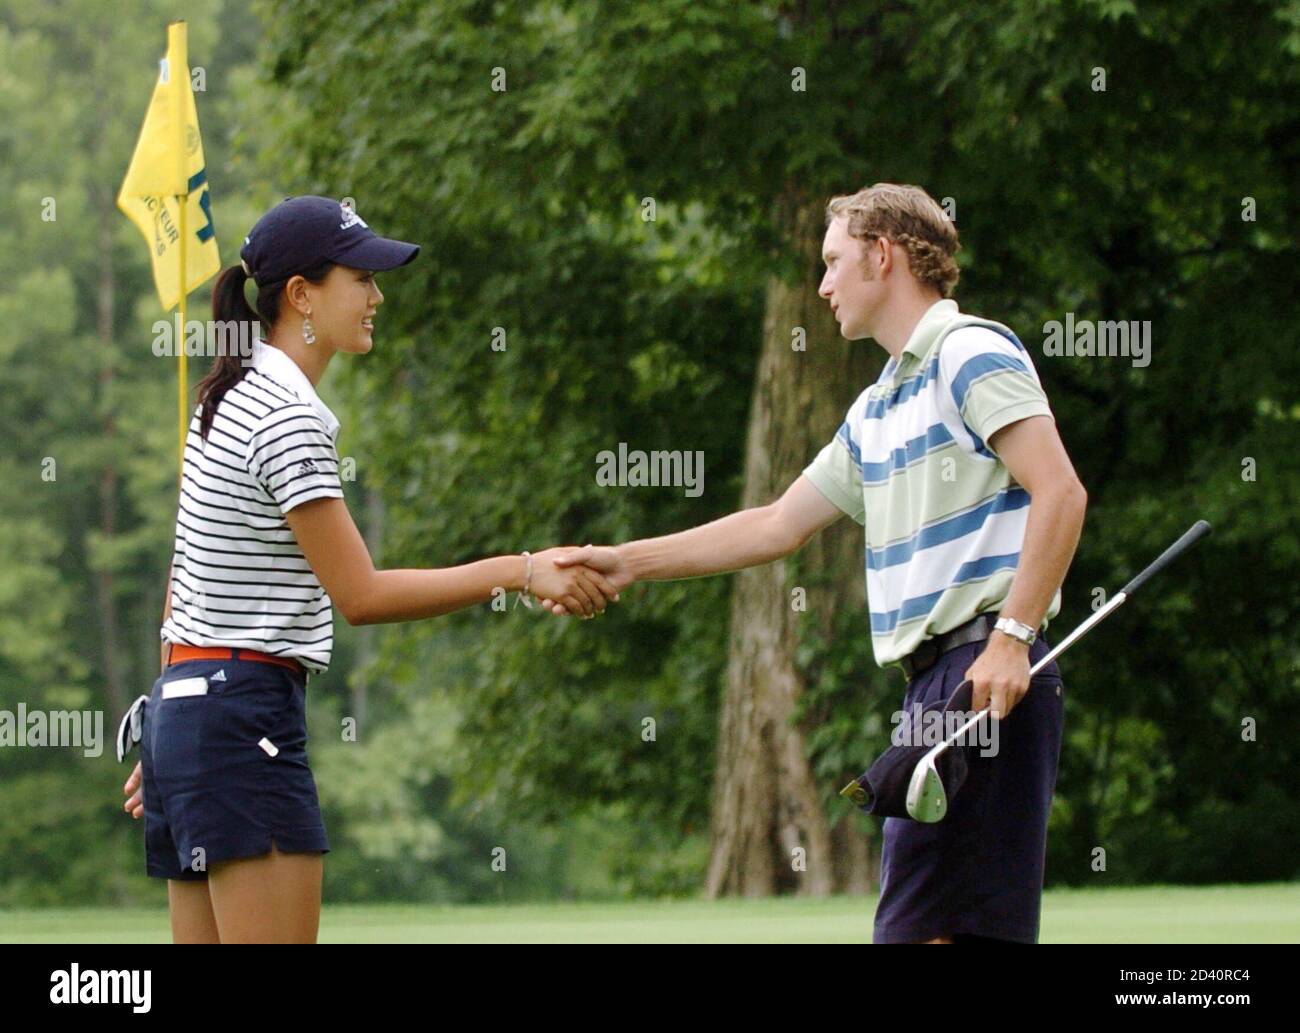 Michelle Wie shakes hands with Clay Ogden after Ogden defeated her in their quarter-final round in Lebanon, Ohio.  Michelle Wie (L) of the U.S. shakes hands with compatriot Clay Ogden after Ogden defeated her 5 and 4 on the 14th green in their quarter-final round of match play in the 2005 United States Amateur Public Links Championship at Shaker Run Golf Club in Lebanon, Ohio, July 15, 2005. REUTERS/John Sommers II Stock Photo